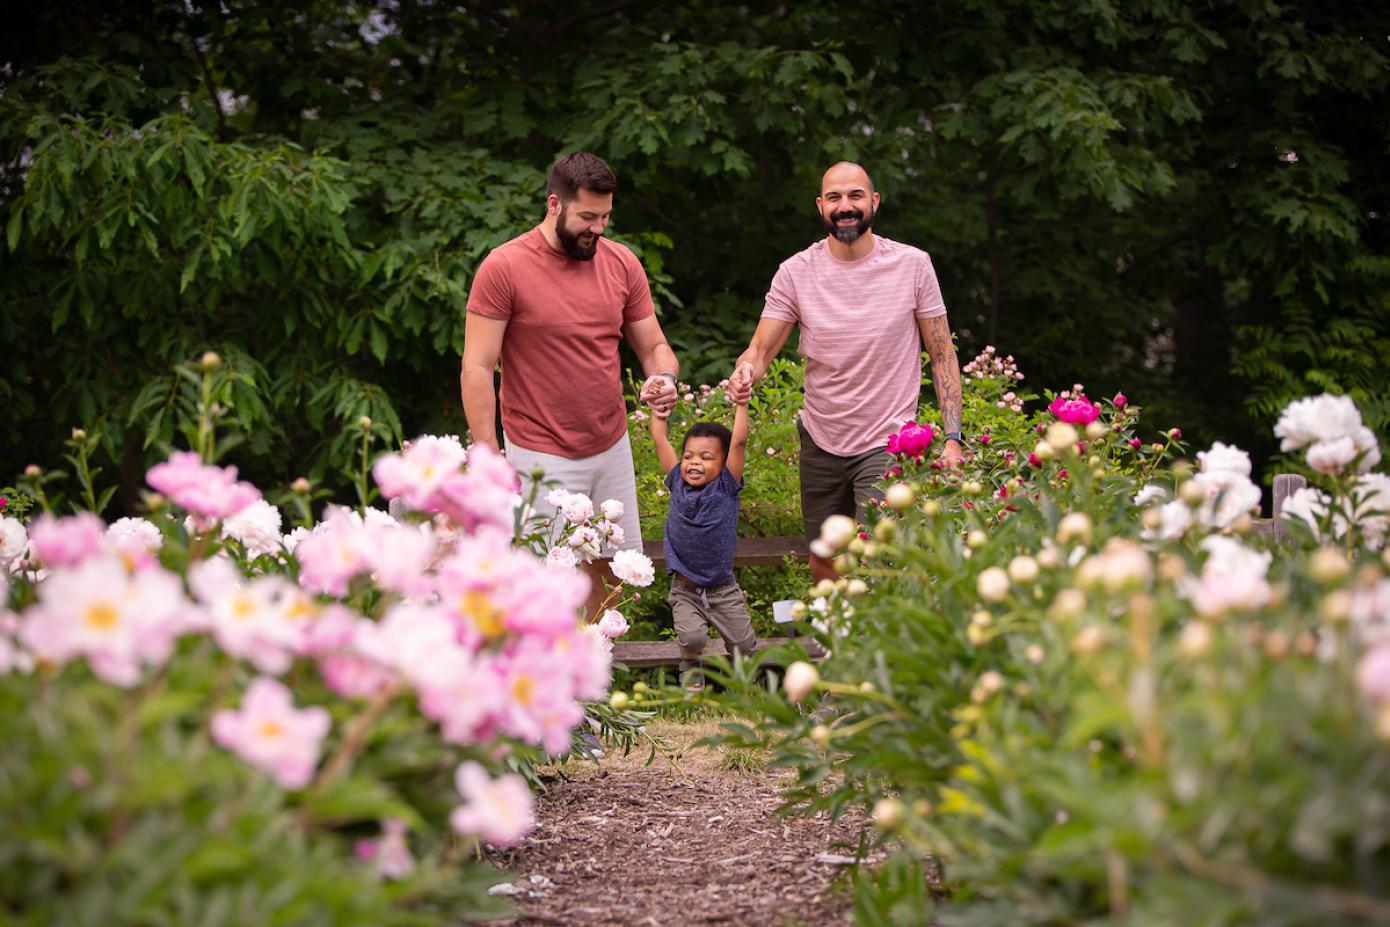 Two adults and a child touring the peony garden